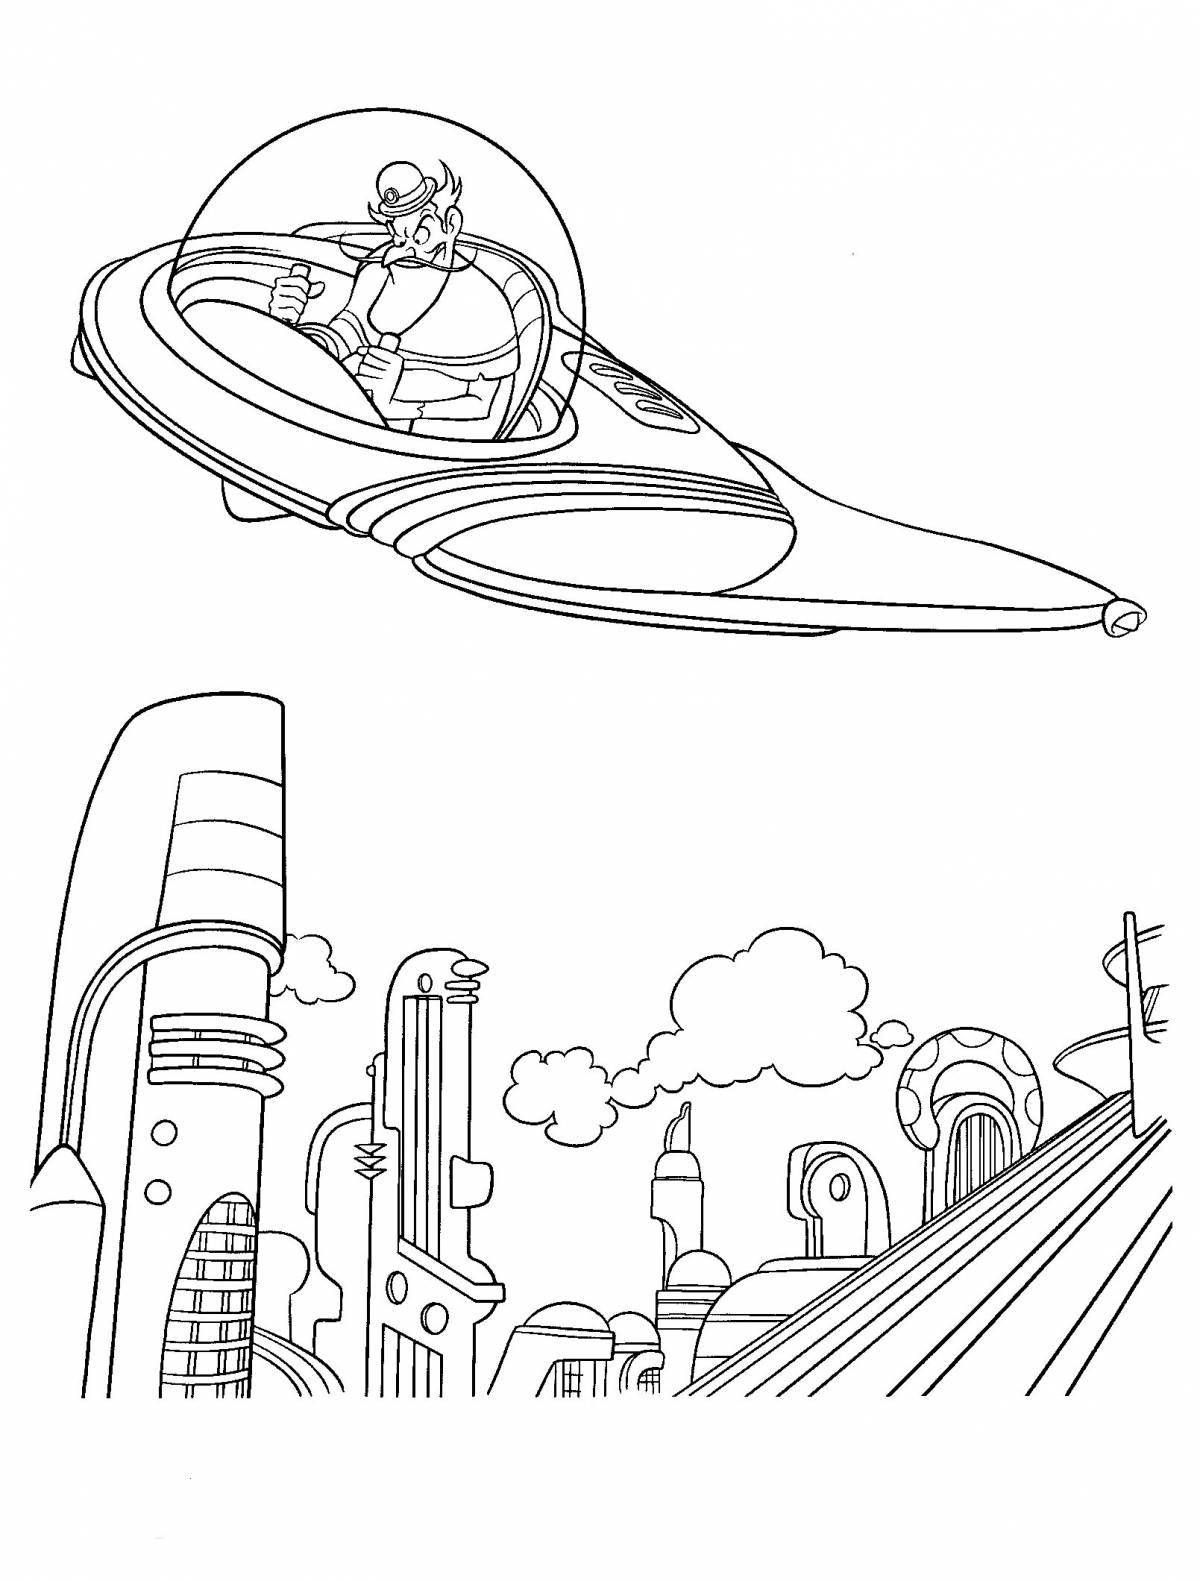 Coloring book radiant city of the future